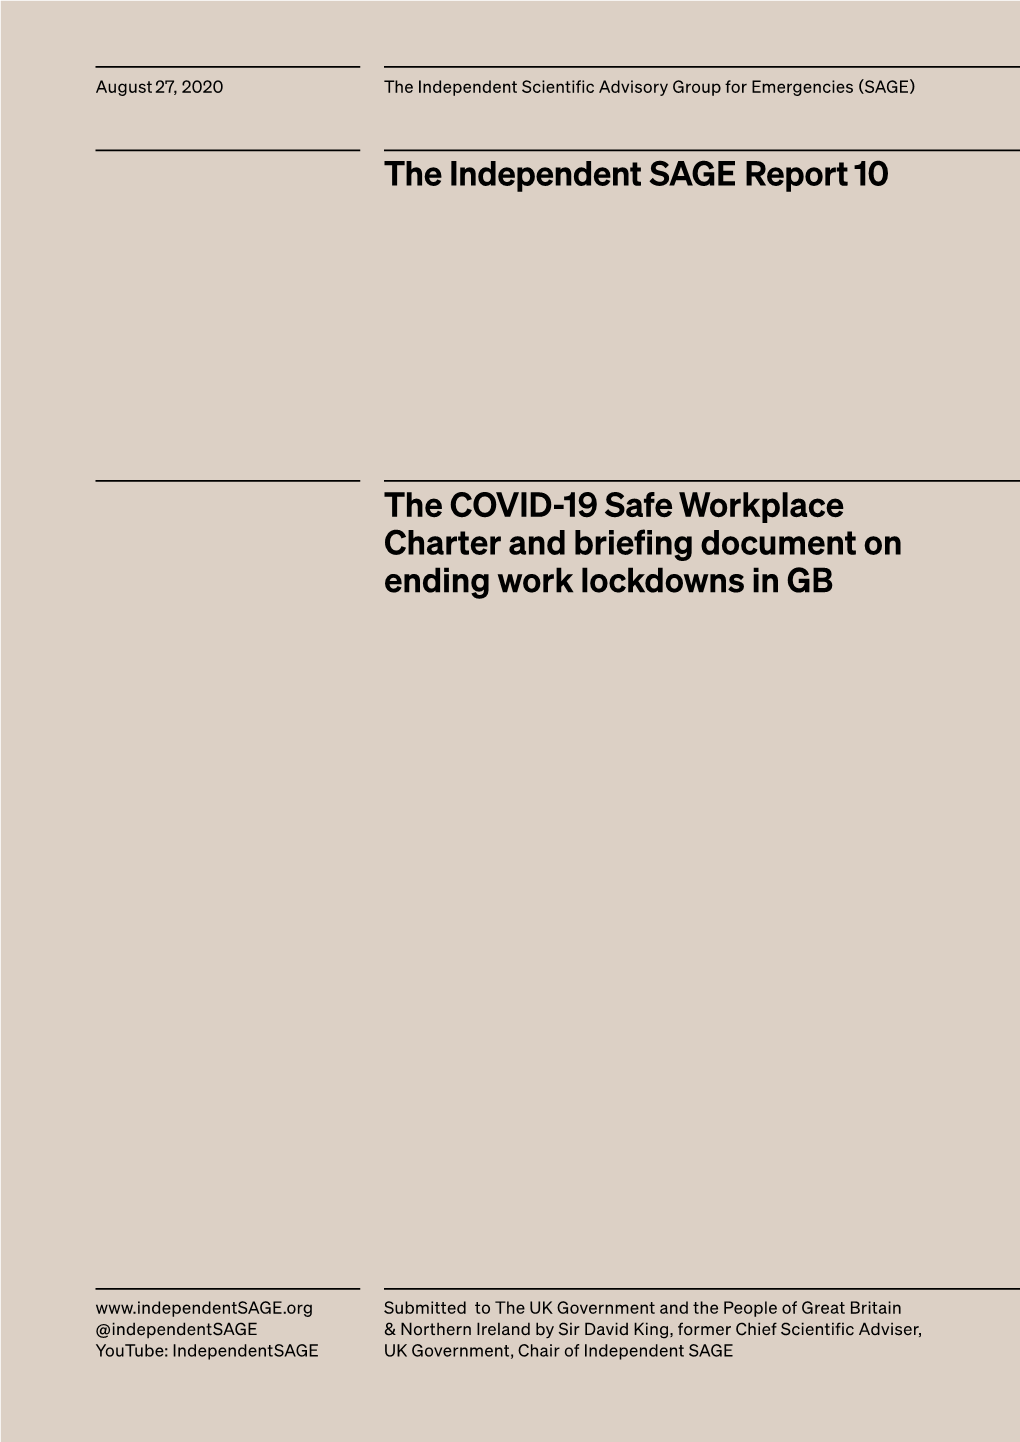 The COVID-19 Safe Workplace Charter and Briefing Document on Ending Work Lockdowns in GB